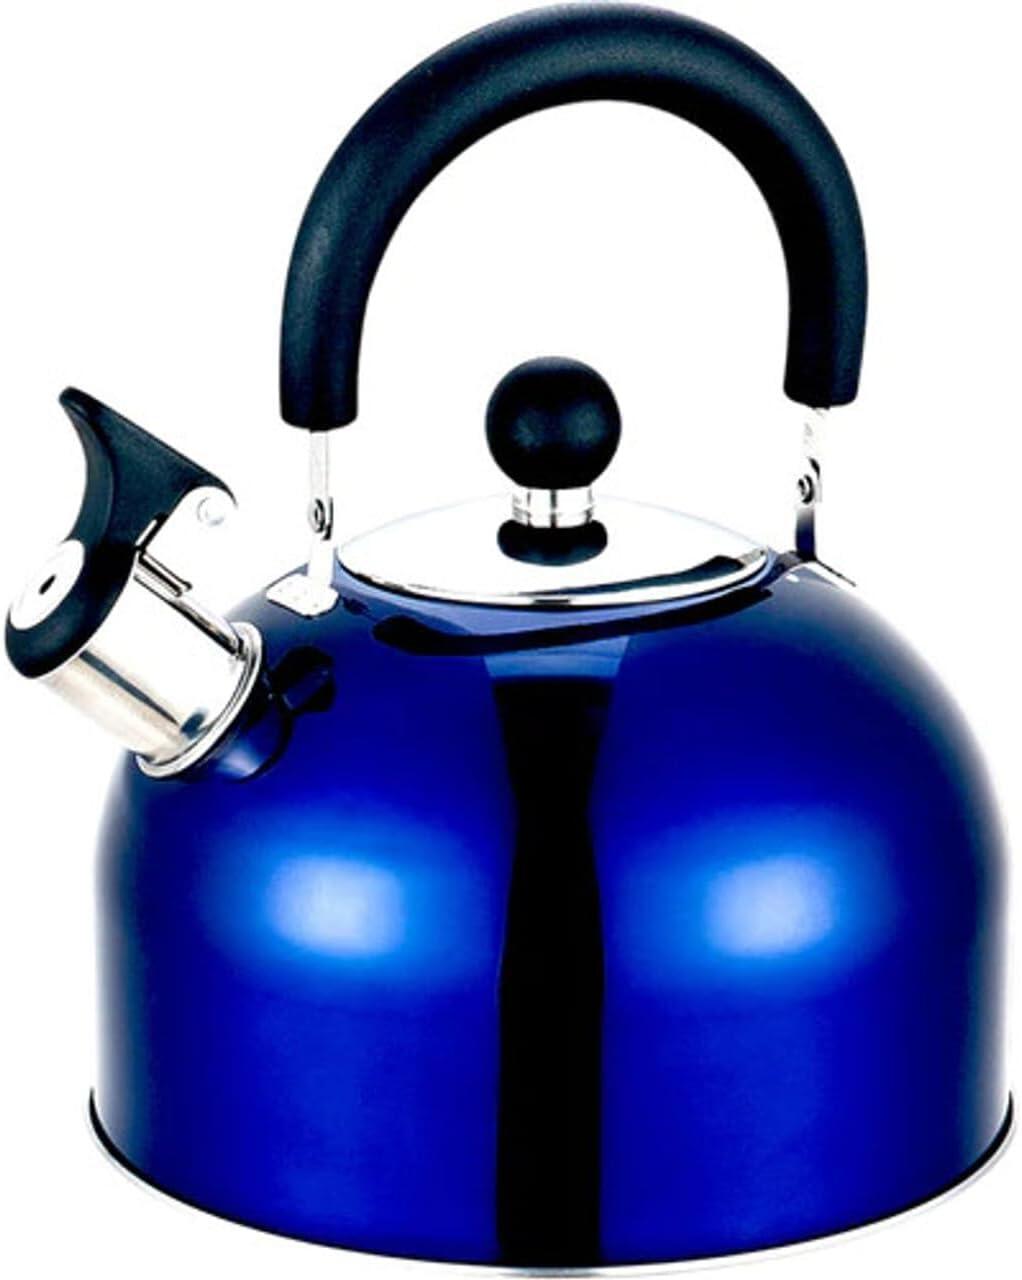 OLPRO 2 Litre Stainless Steel Whistling Kettle (Blue)